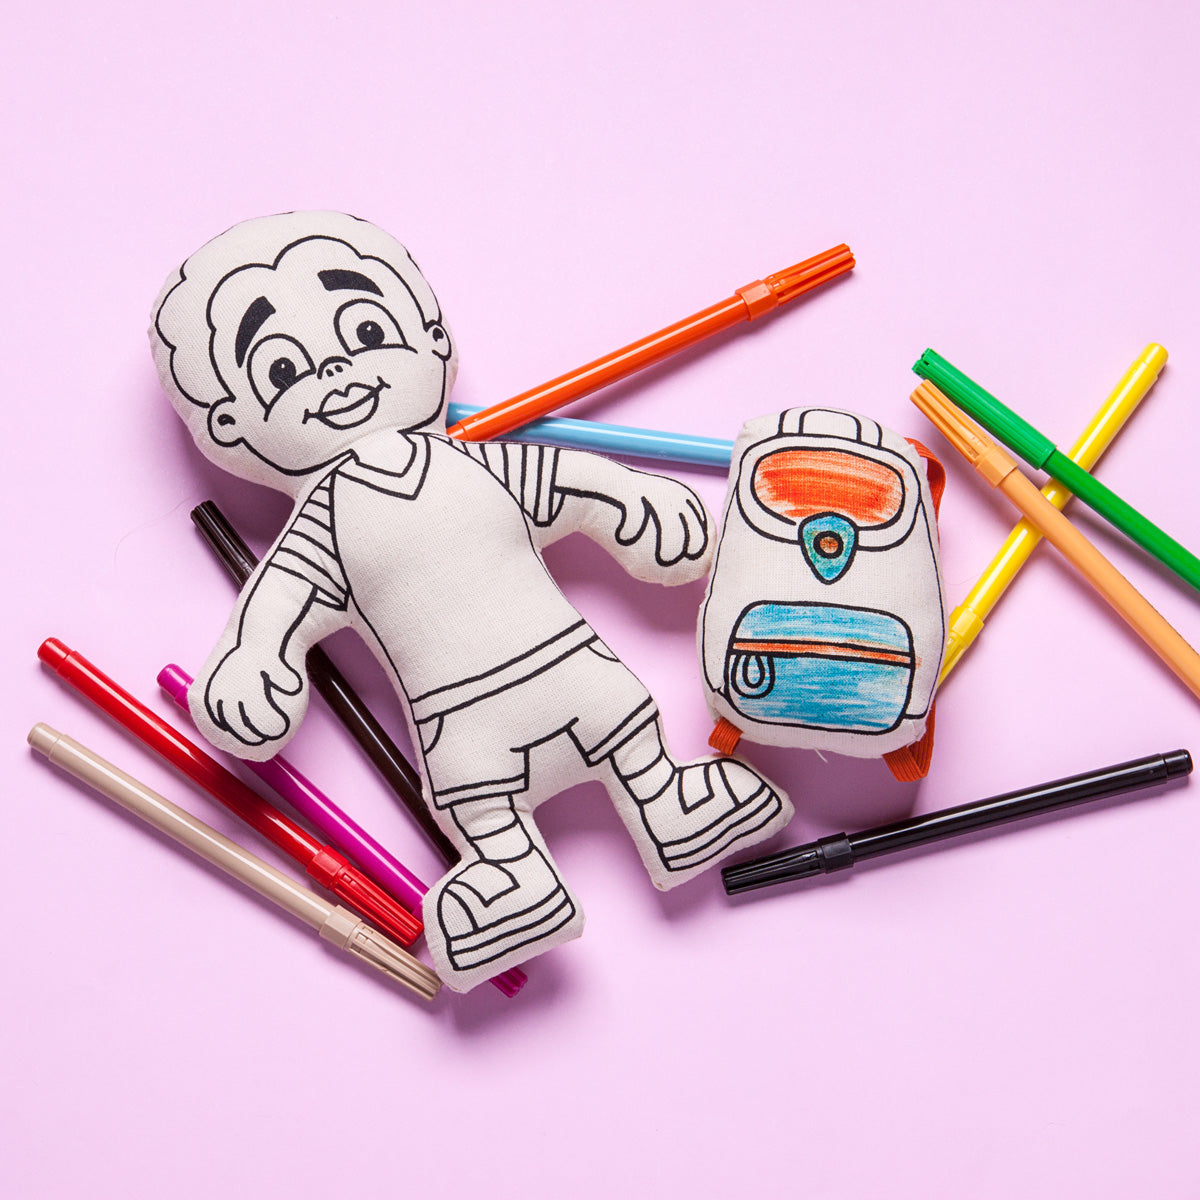 Kiboo Kids: Boy With Striped T-shirt - Colorable And Washable Doll For Creative Play